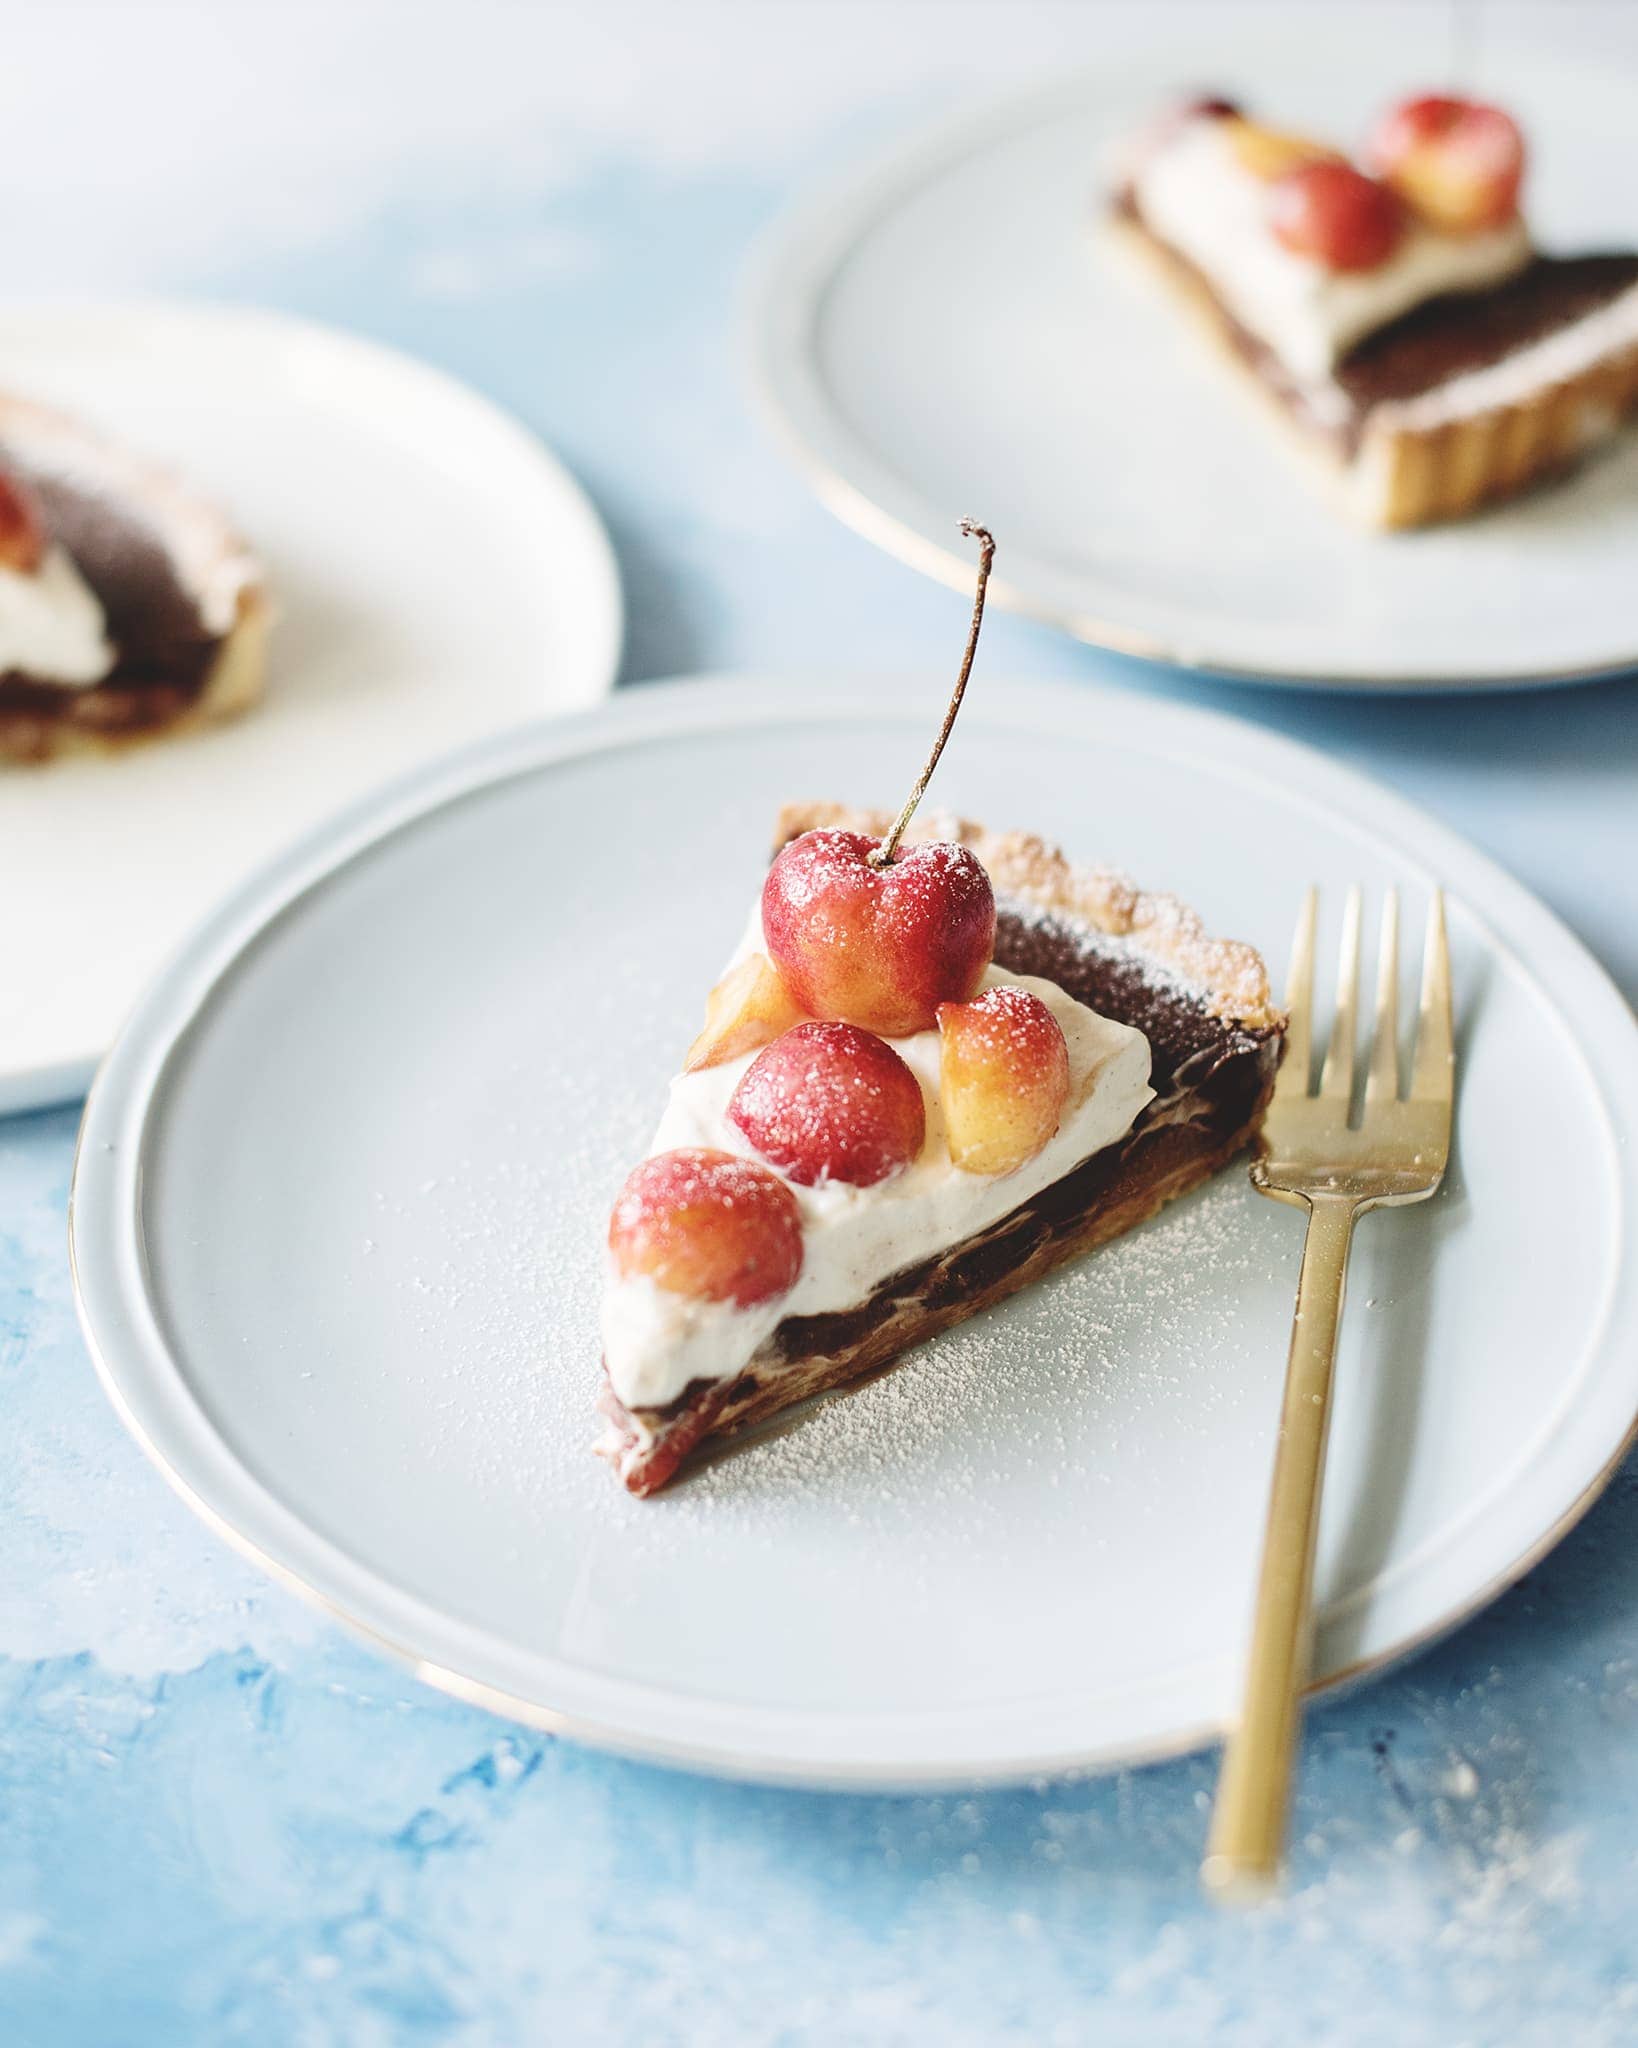 Slices of chocolate cherry tart with cardamom cream on blue plates and on blue background